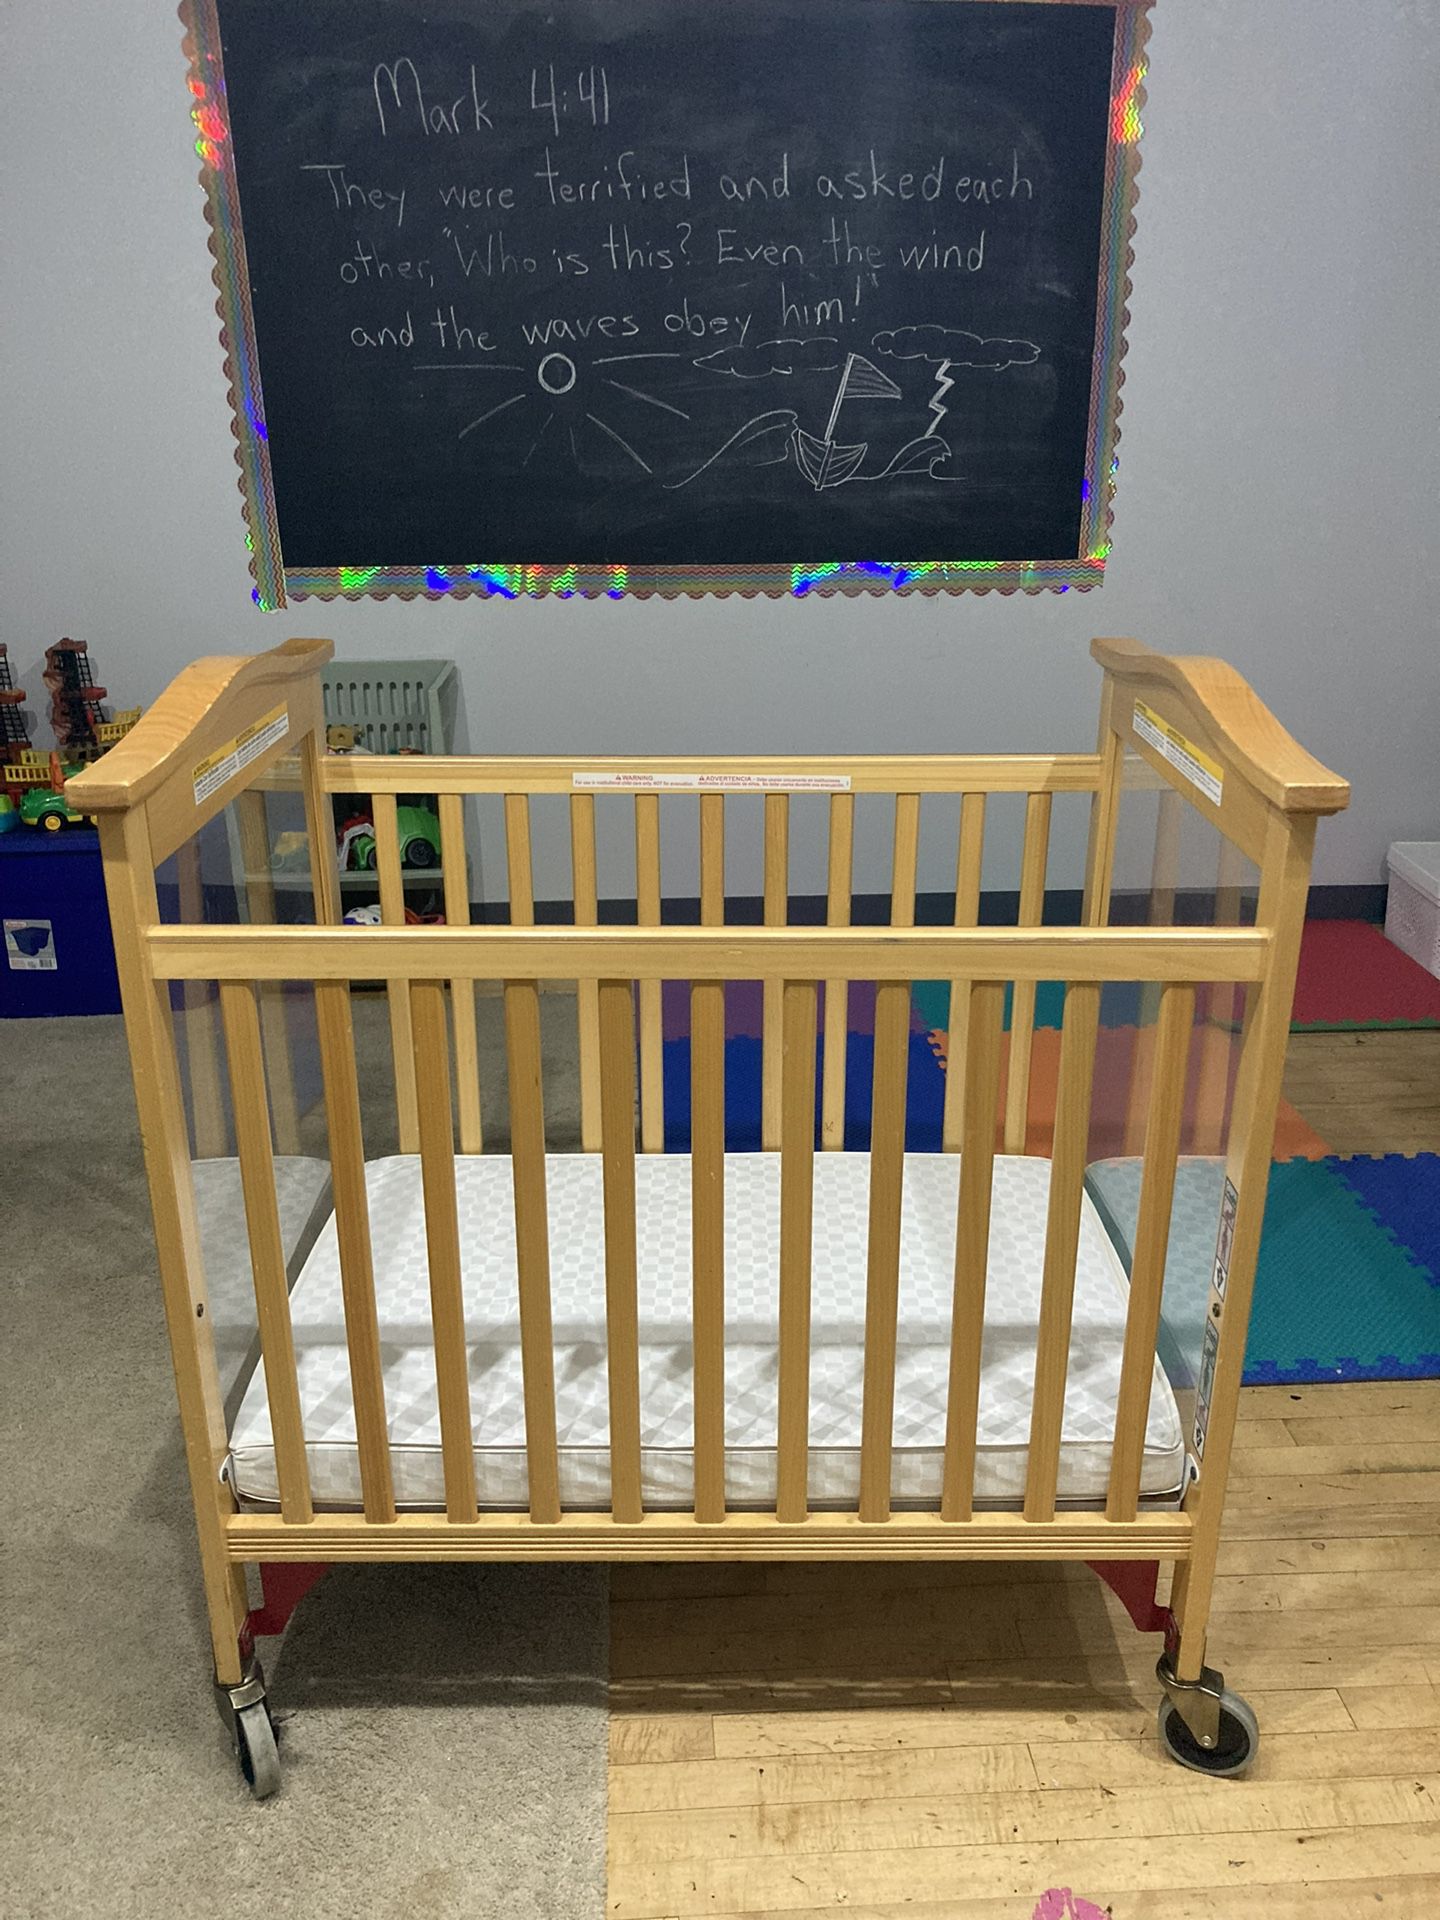 Crib With Clear Sides And Wheels 